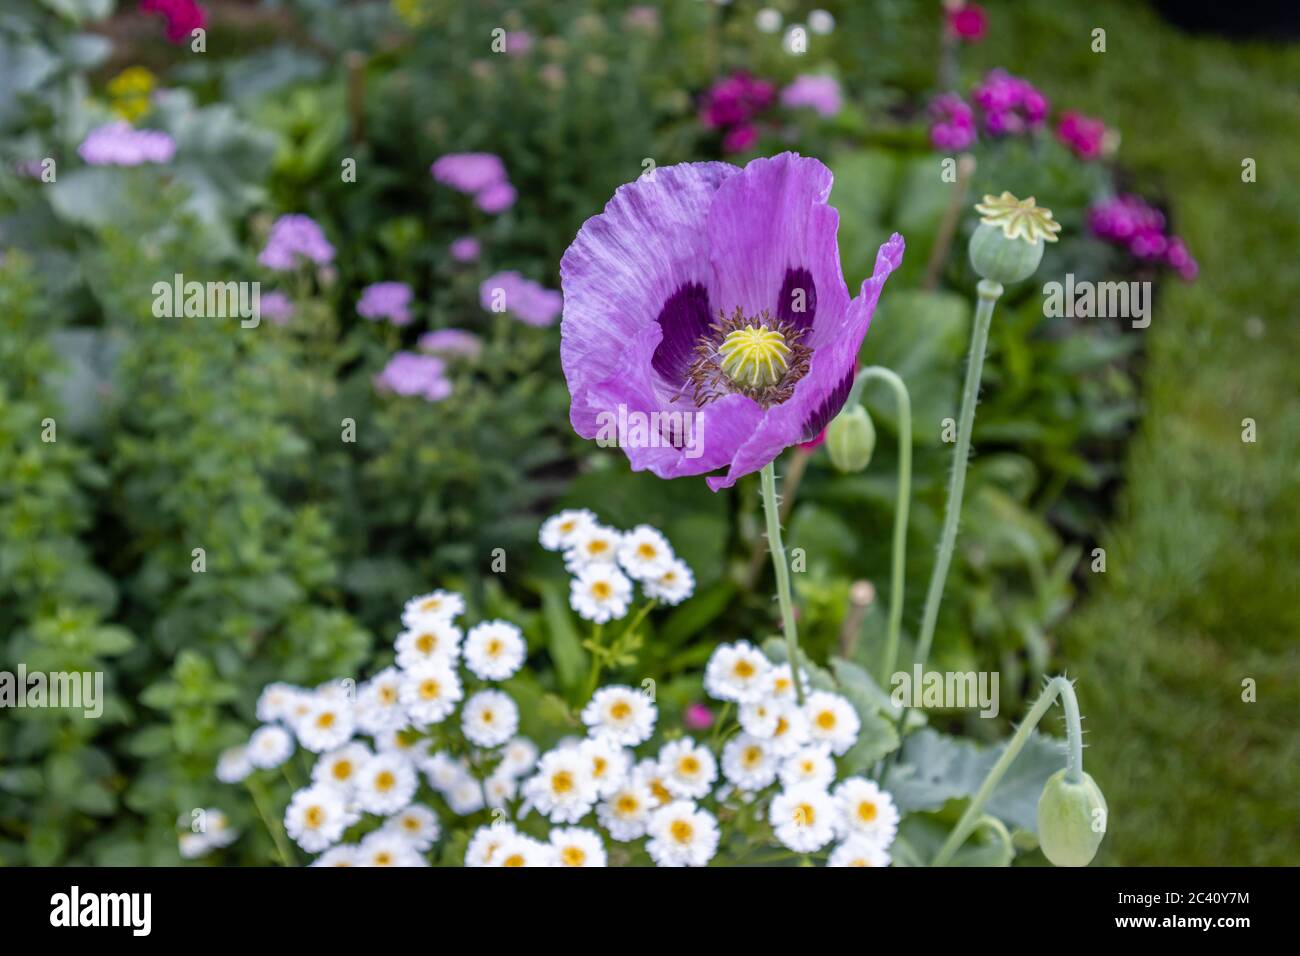 Purple opium poppy, Papaver somniferum, in flower in a border in a garden in early summer, Surrey, south-east England Stock Photo